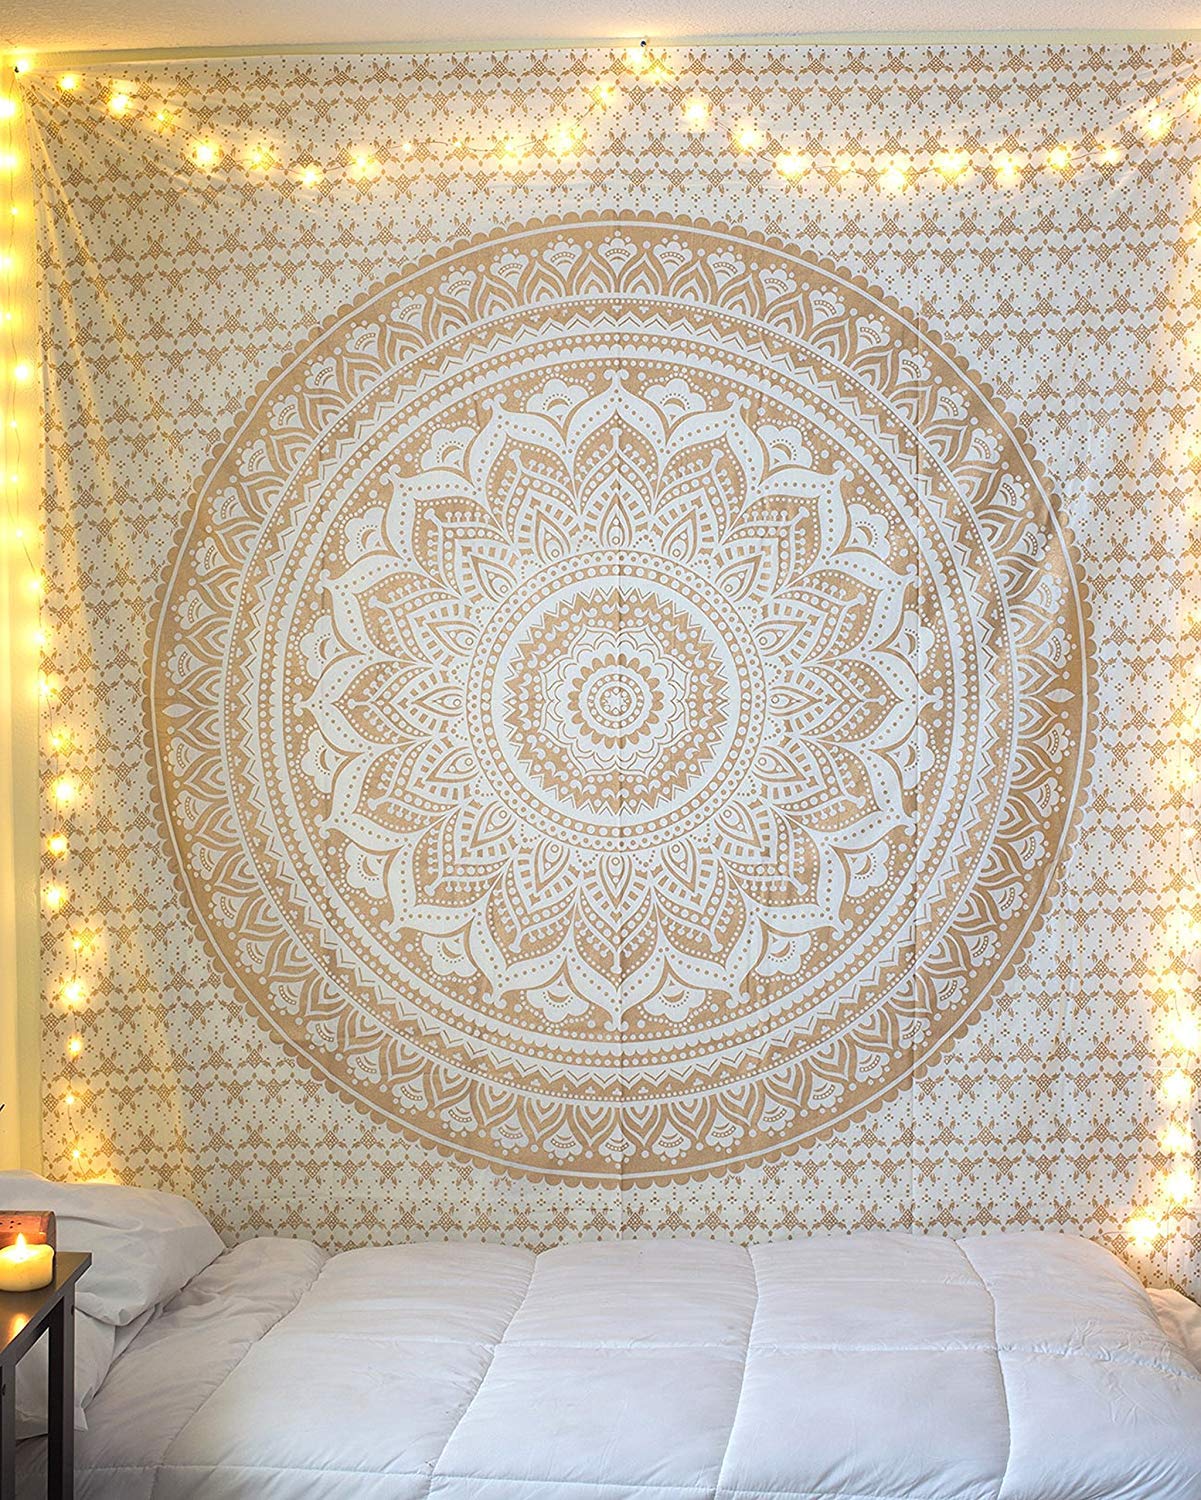 Bohemian Tapestries for Home Dorm Living Room Bedroom Ceiling Decor Large Blanket for Men Women with Non-Mark Hooks & Clips 51X59 Inches Black and White Mandala Ombre Tapestry Wall Hanging